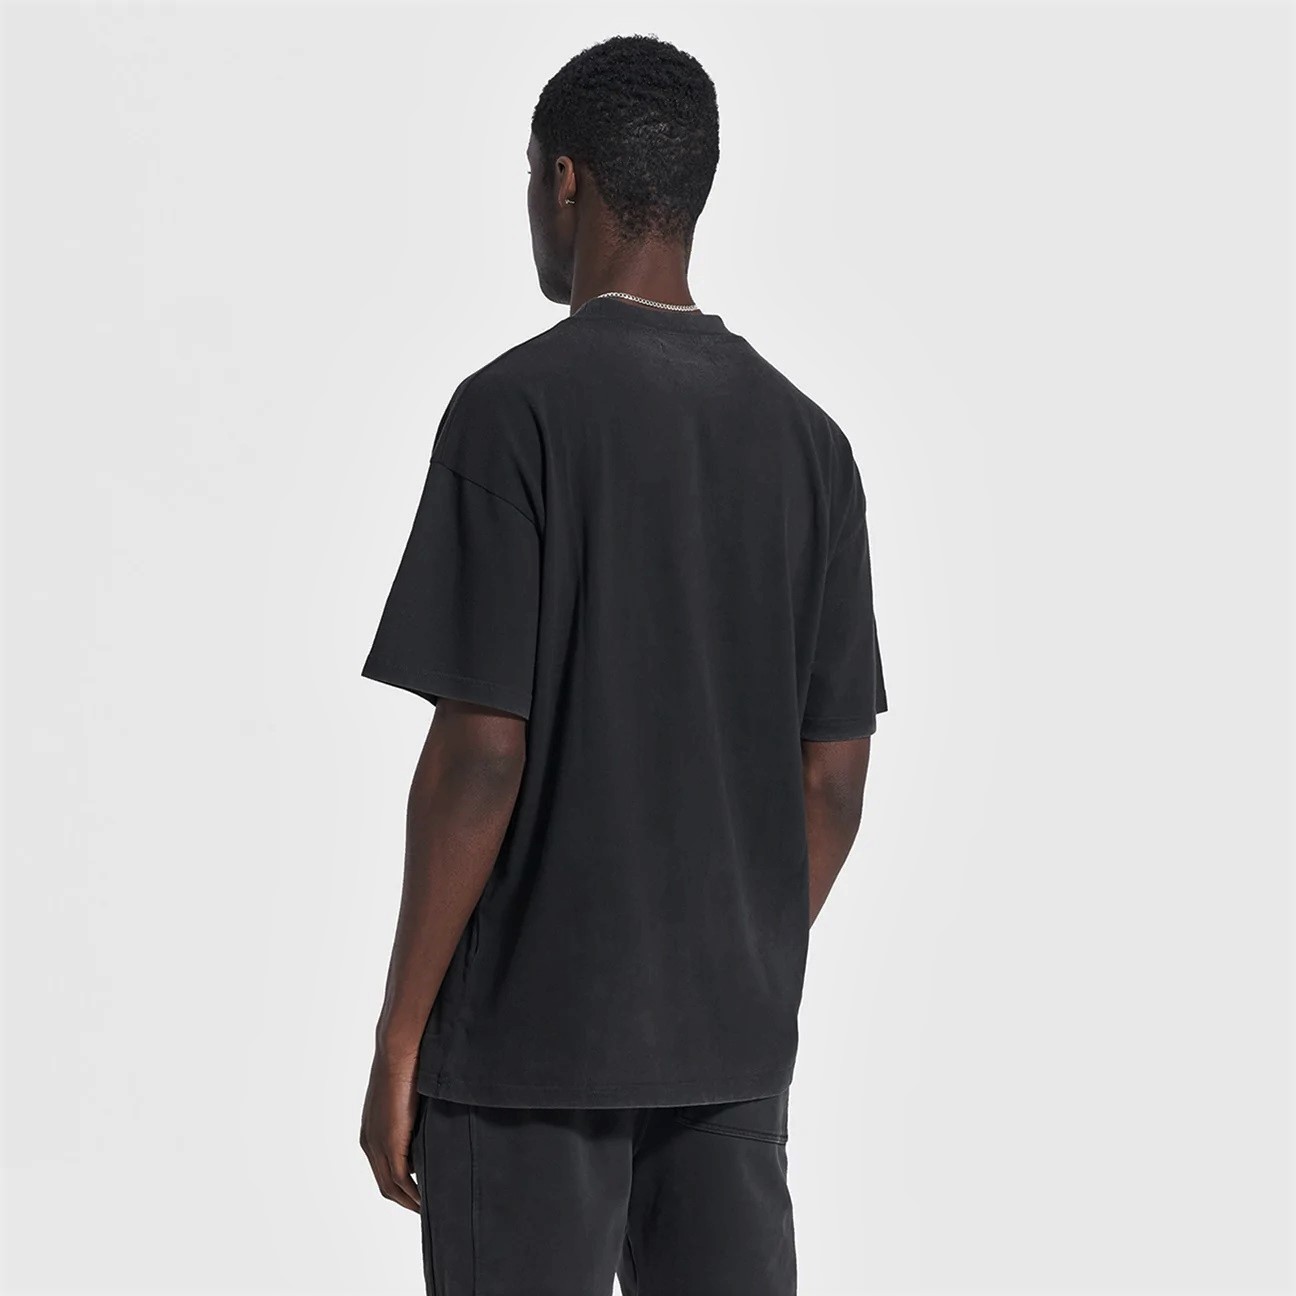 Represent Blank T-Shirt in Off Black S